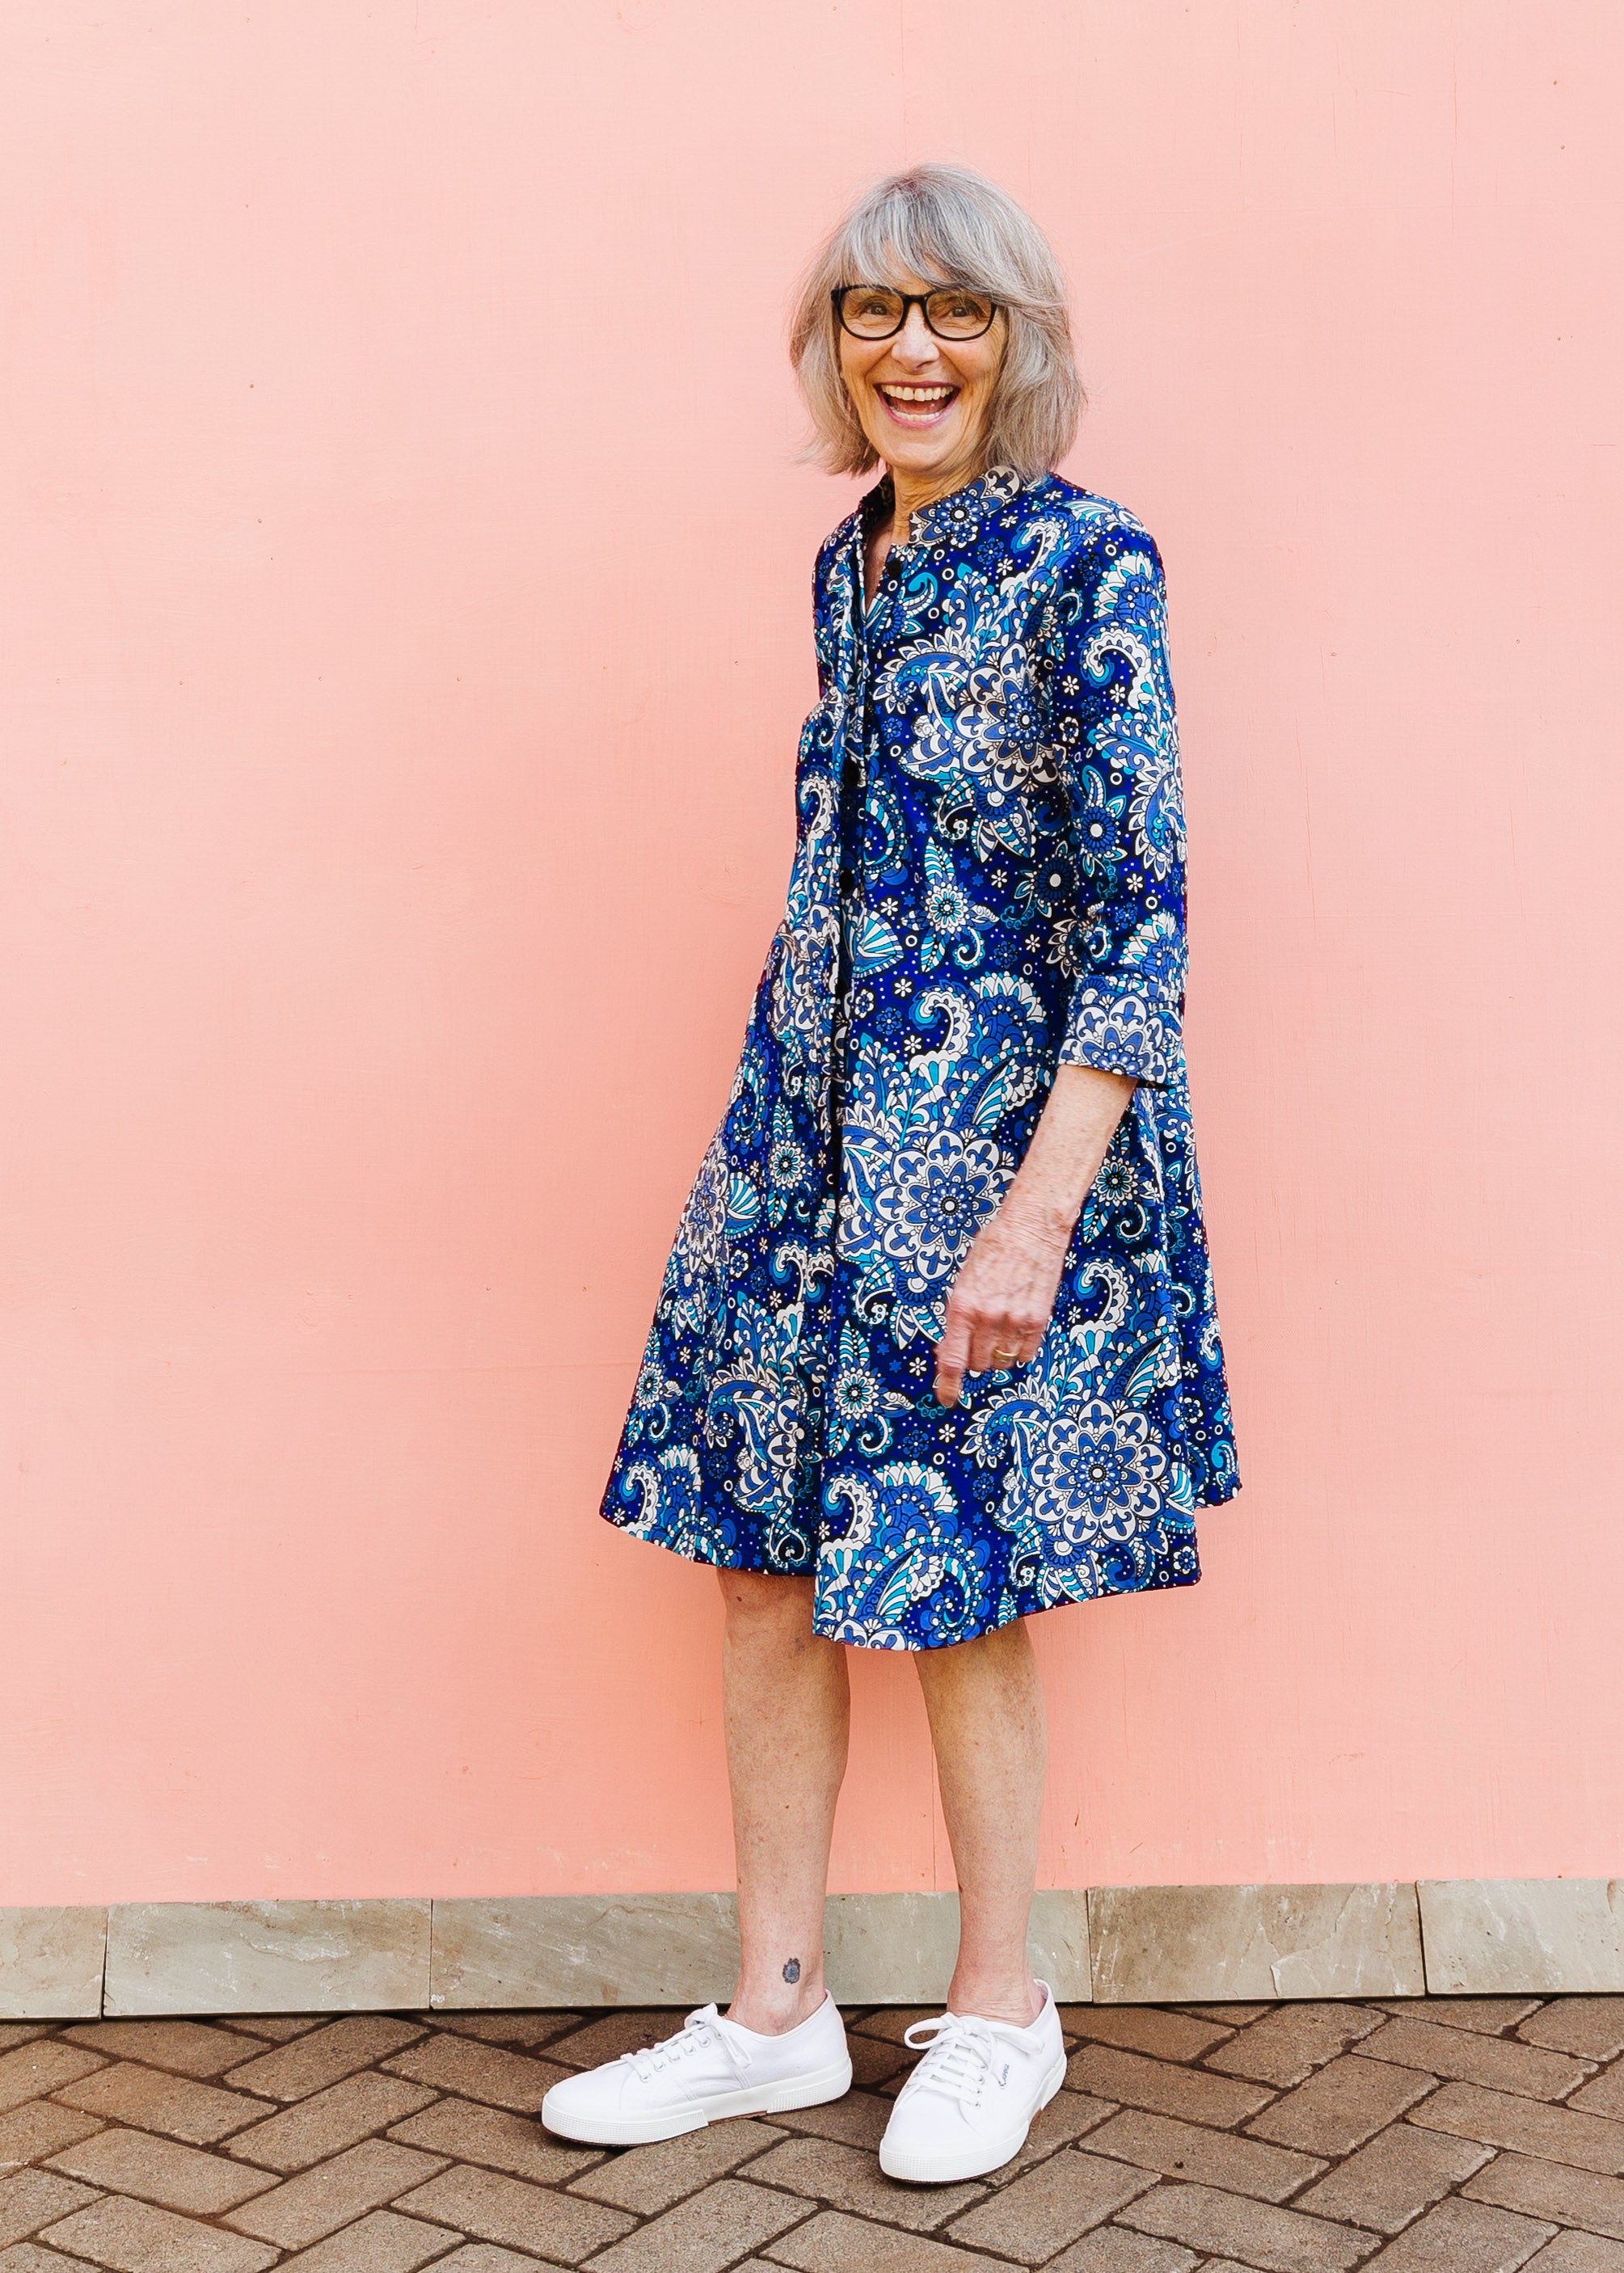 Model wearing blue paisley dress, paired with white sneakers.